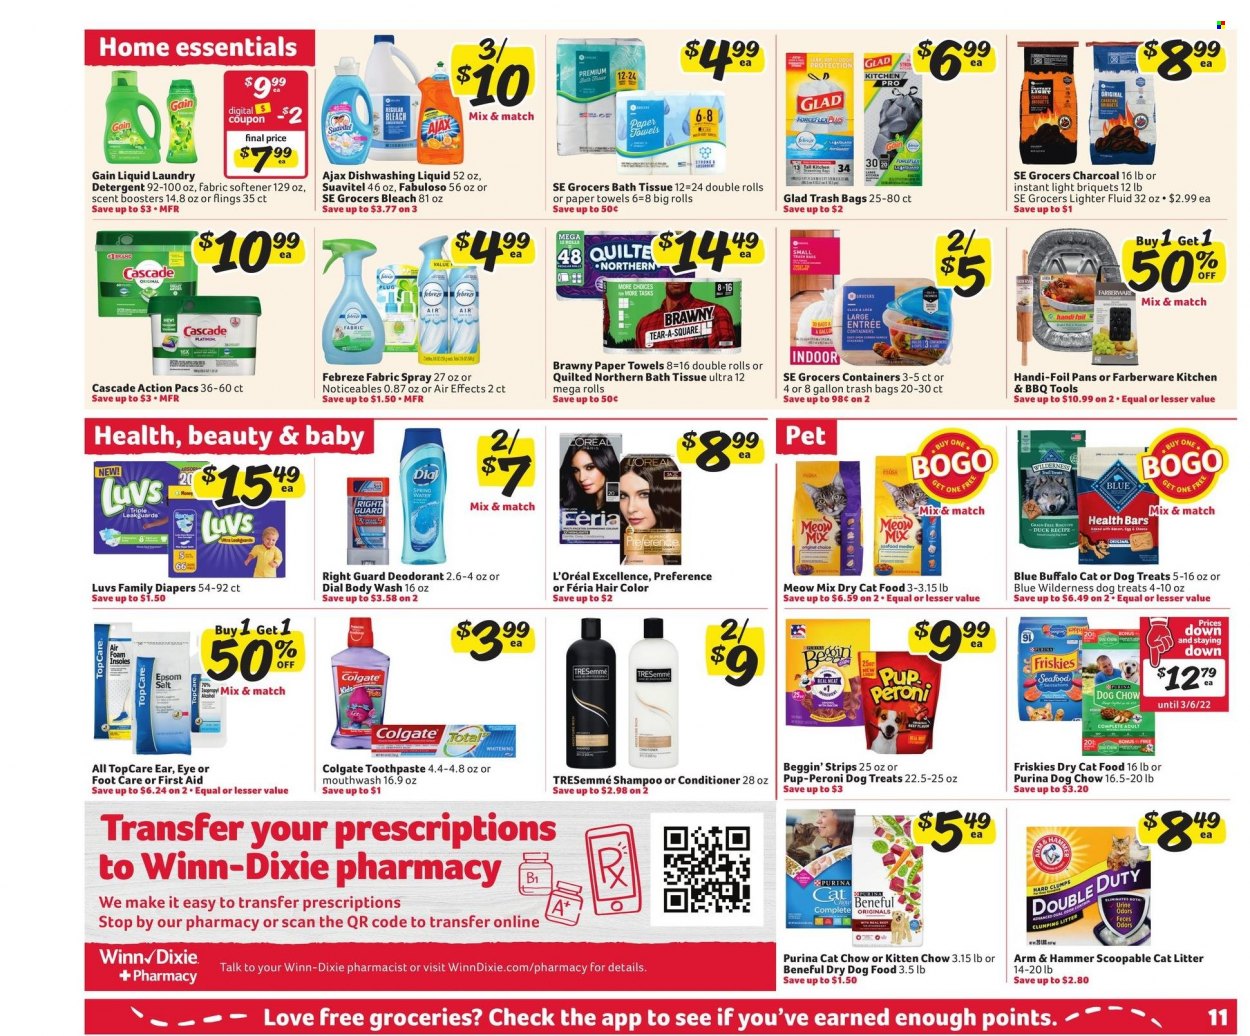 thumbnail - Winn Dixie Flyer - 01/12/2022 - 01/18/2022 - Sales products - strips, ARM & HAMMER, spring water, nappies, bath tissue, Quilted Northern, kitchen towels, paper towels, detergent, Febreze, Gain, bleach, Ajax, Fabuloso, Cascade, fabric softener, laundry detergent, scent booster, dishwashing liquid, body wash, shampoo, Dial, Colgate, toothpaste, mouthwash, L’Oréal, conditioner, TRESemmé, hair color, anti-perspirant, deodorant, bag, trash bags, foot care, gallon, cat litter, animal food, Blue Buffalo, cat food, dog food, Dog Chow, Purina, dry dog food, dry cat food, Pup-Peroni, Meow Mix, Beggin', Friskies, Blue Wilderness. Page 13.